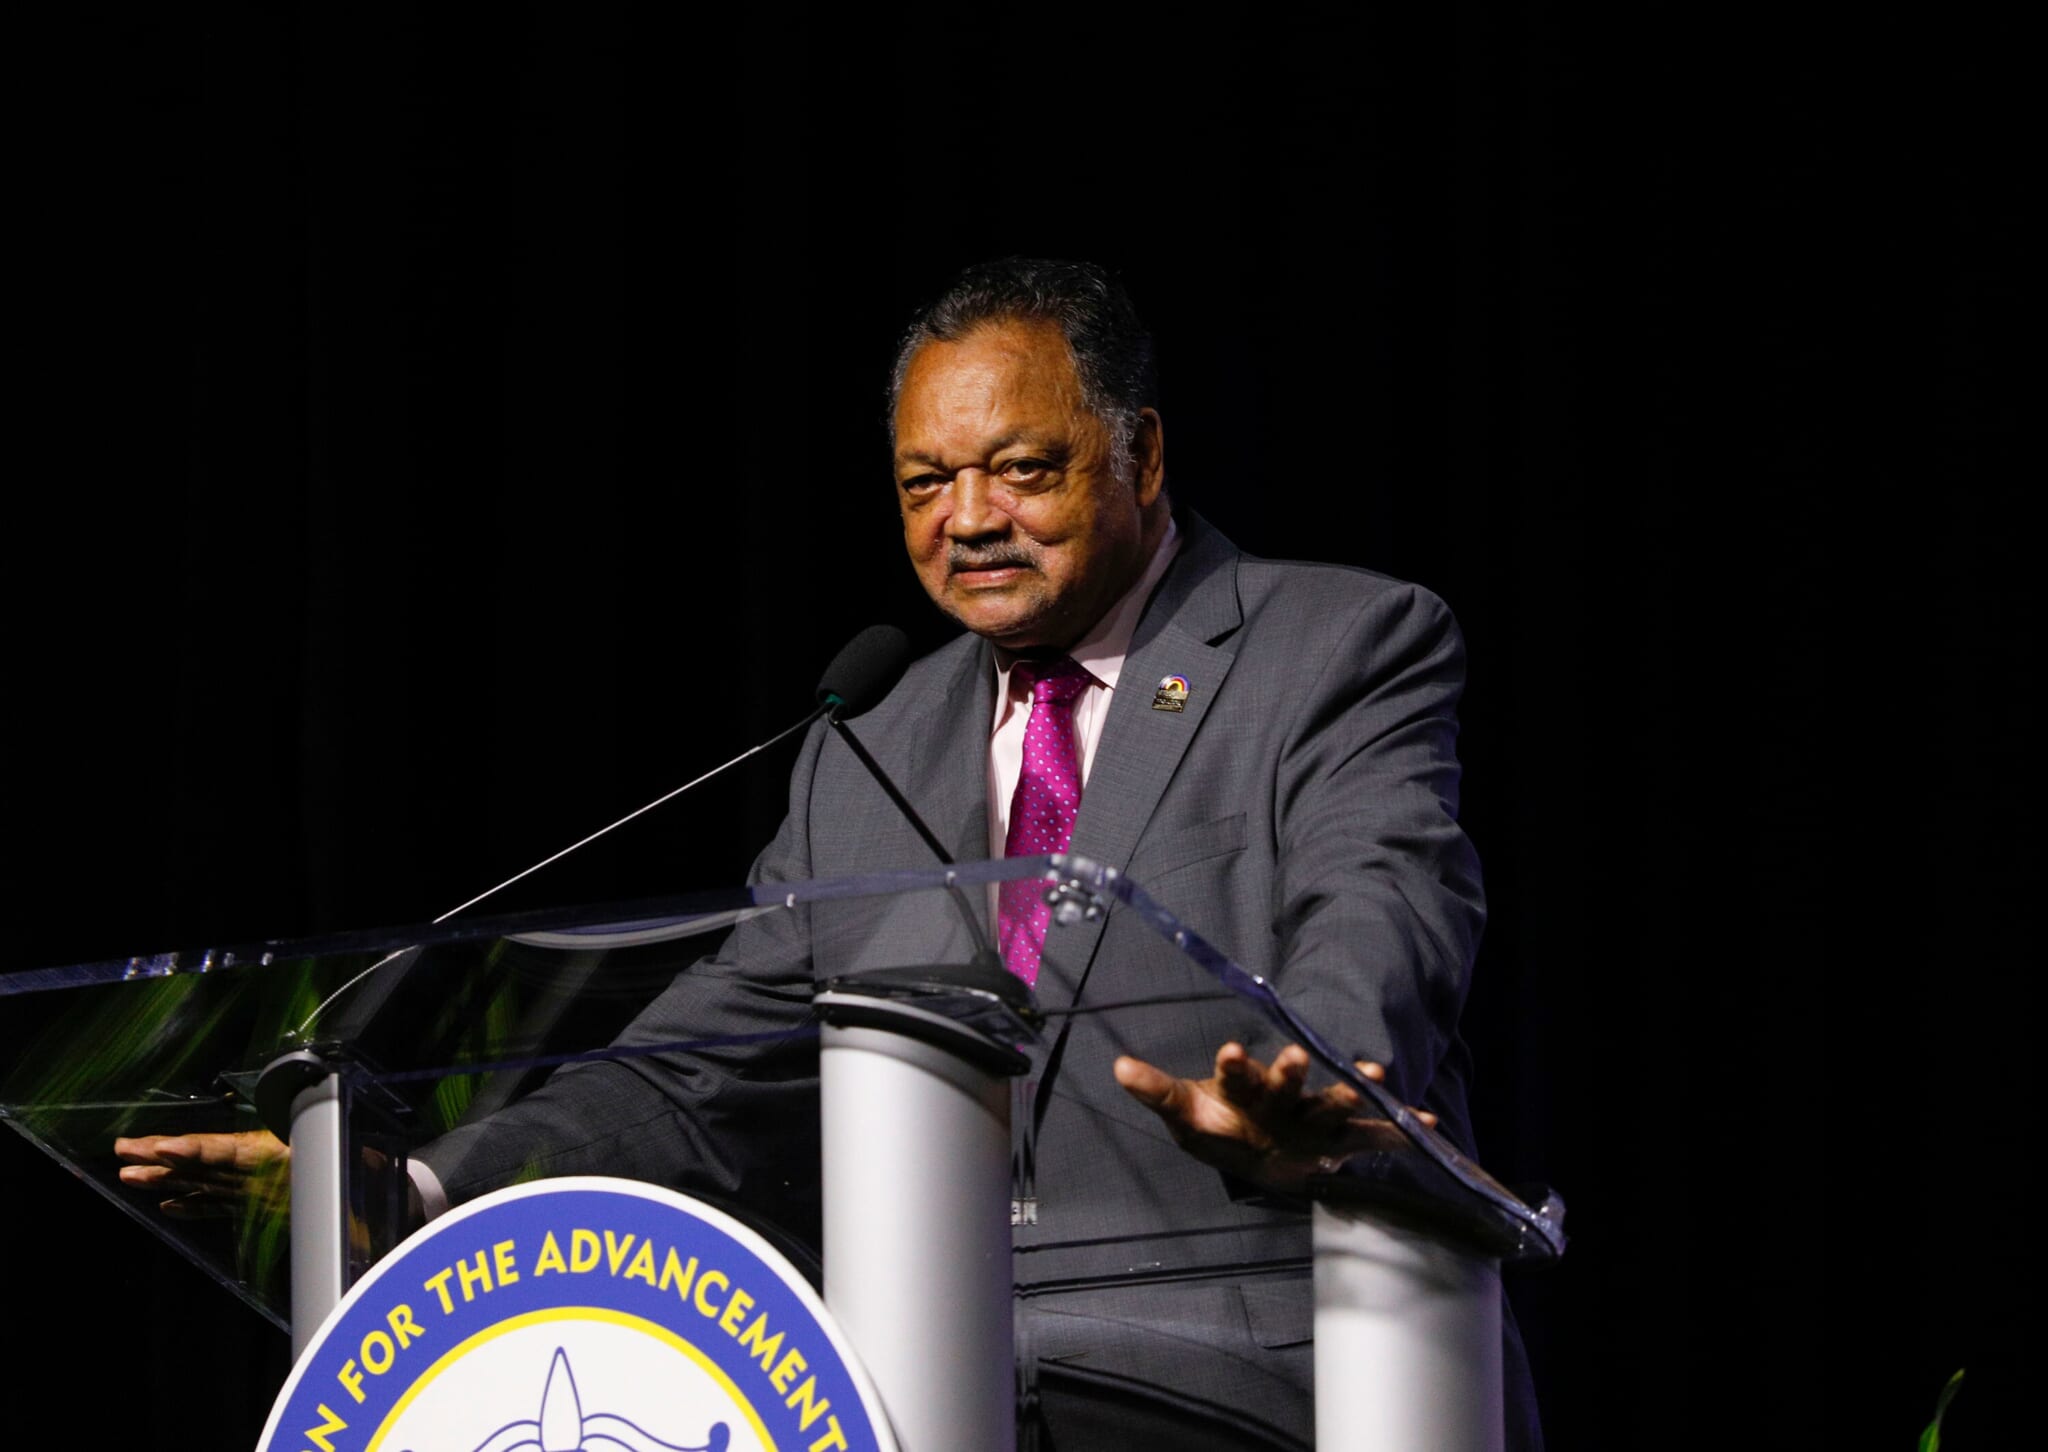 Jesse Jackson released from hospital after 3-week stay: ‘I was unable to walk’